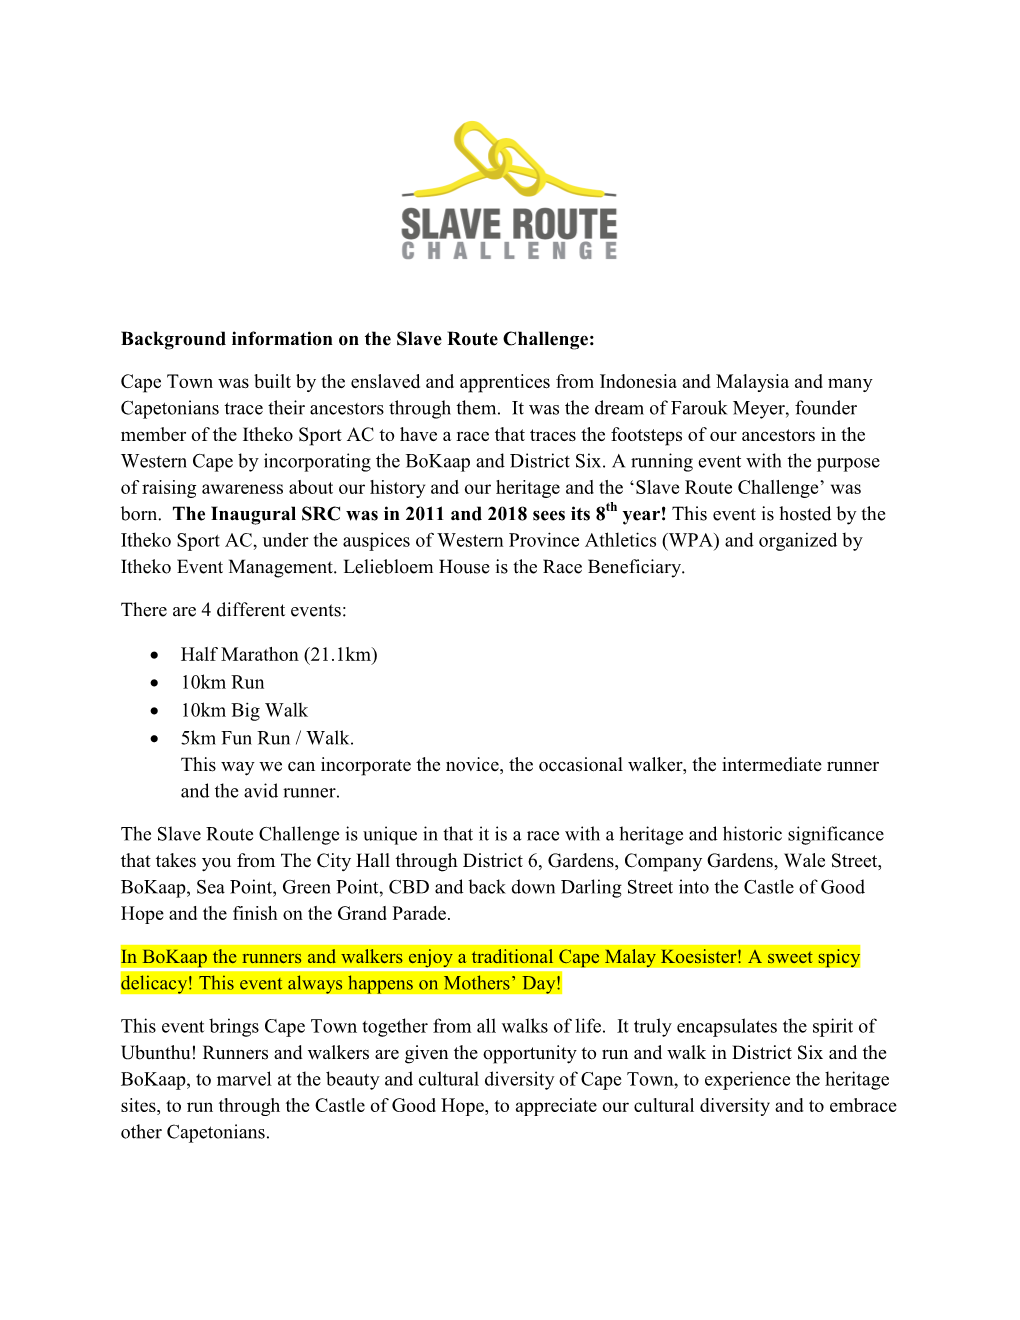 Background Information on the Slave Route Challenge: Cape Town Was